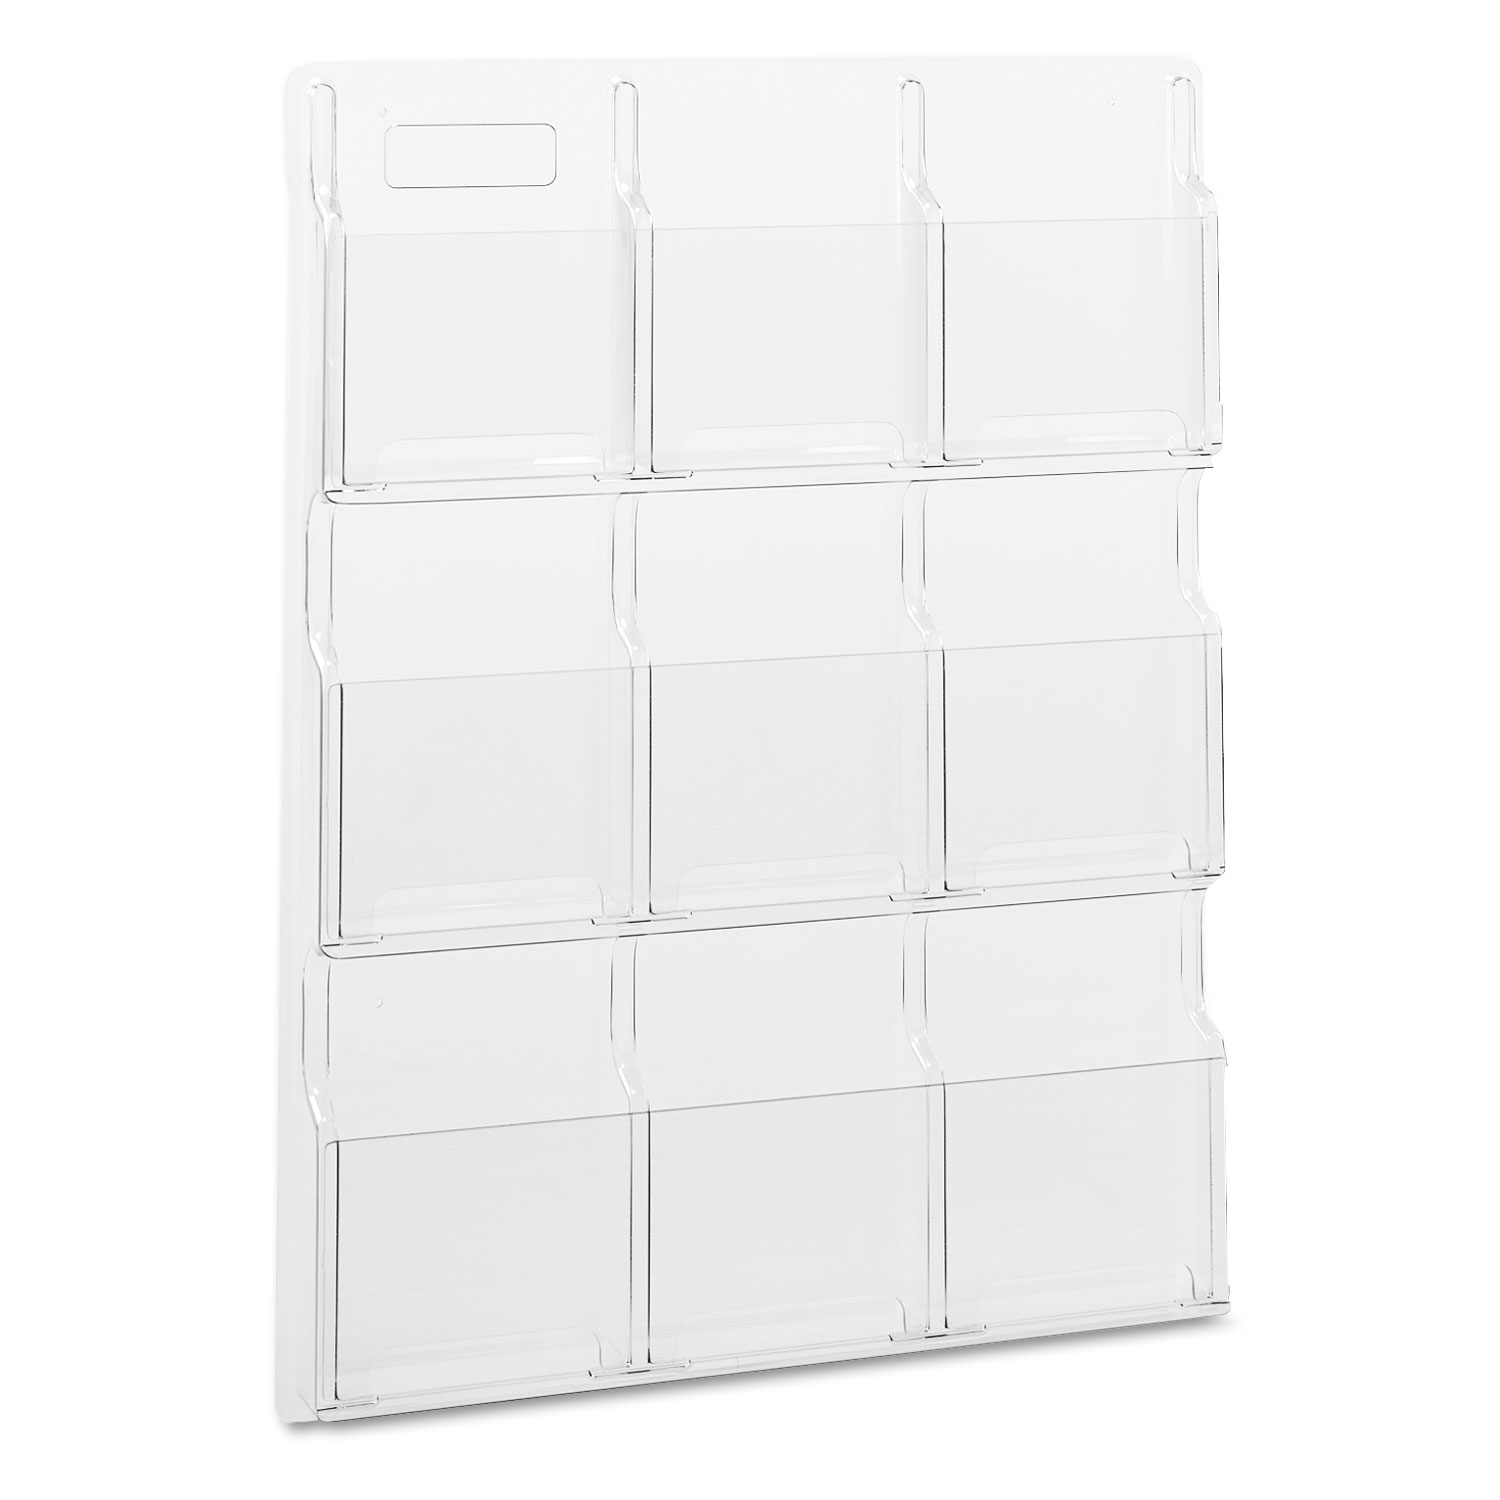  Safco 5603CL Reveal Clear Literature Displays, 9 Compartments, 30w x 2d x 36.75h, Clear (SAF5603CL) 